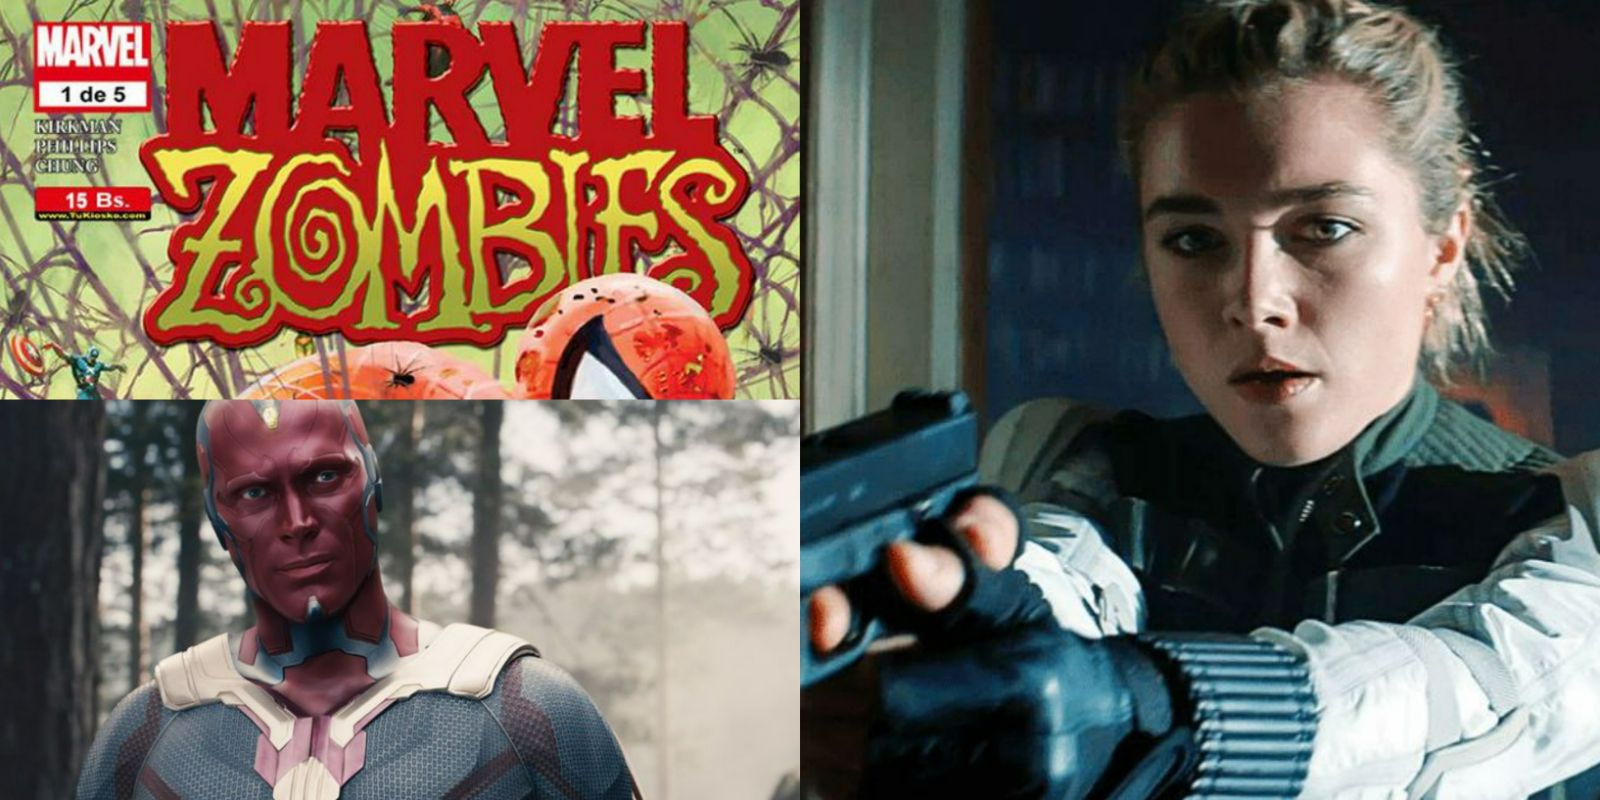 A split image of the Marvel Zombies logo, The Vision, and the new Black Widow in the MCU